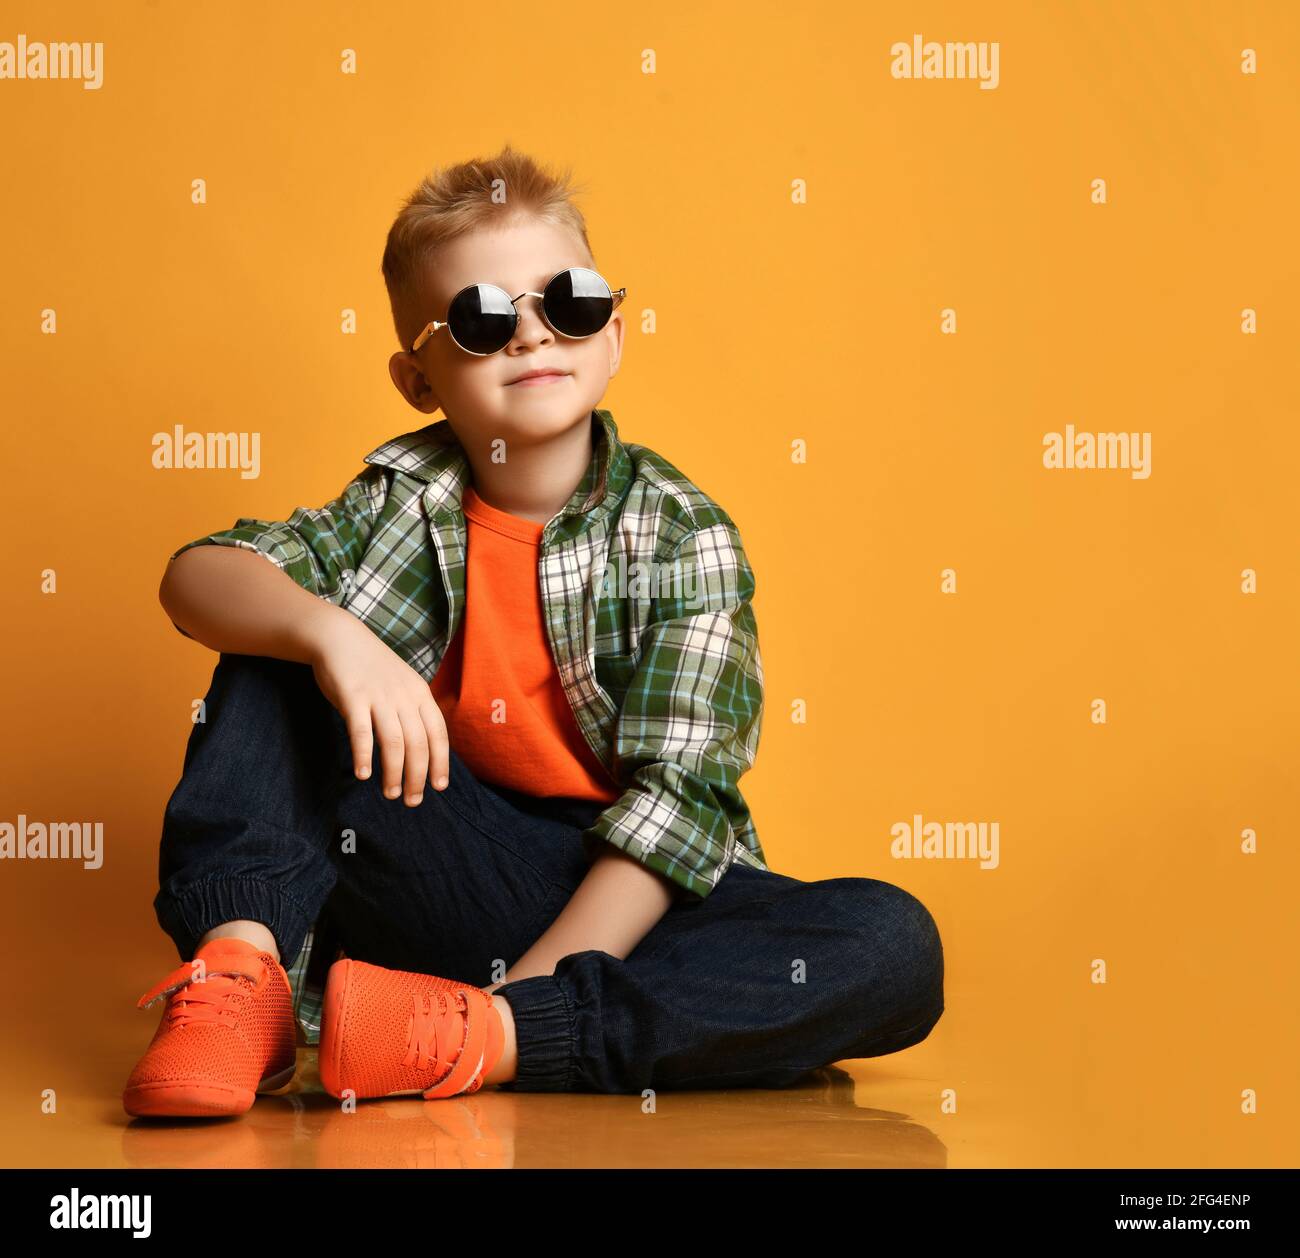 Calm nice kid, schoolboy teenager in round sunglasses, checkered shirt, t-shirt and jeans sits on floor looking up Stock Photo